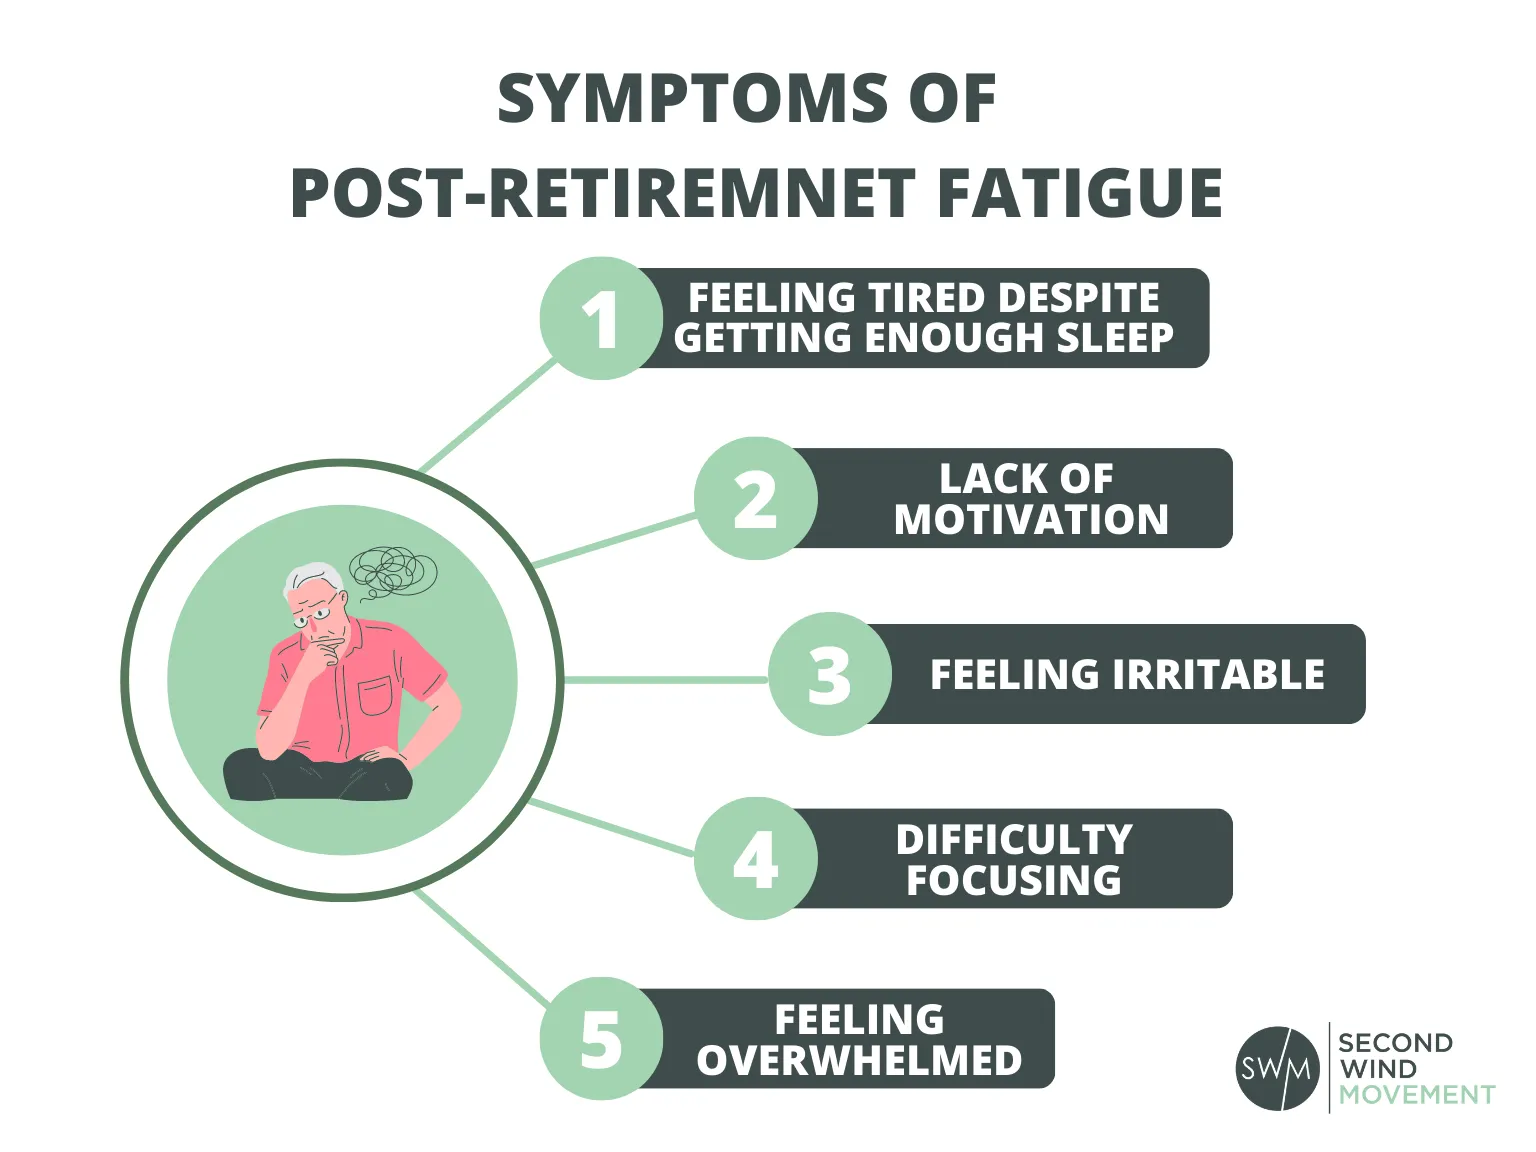 symptoms of post-retirement fatigue: feeling tired despite getting enough sleep, lack of motivation, feeling irritable, difficulty focusing, feeling overwhelmed